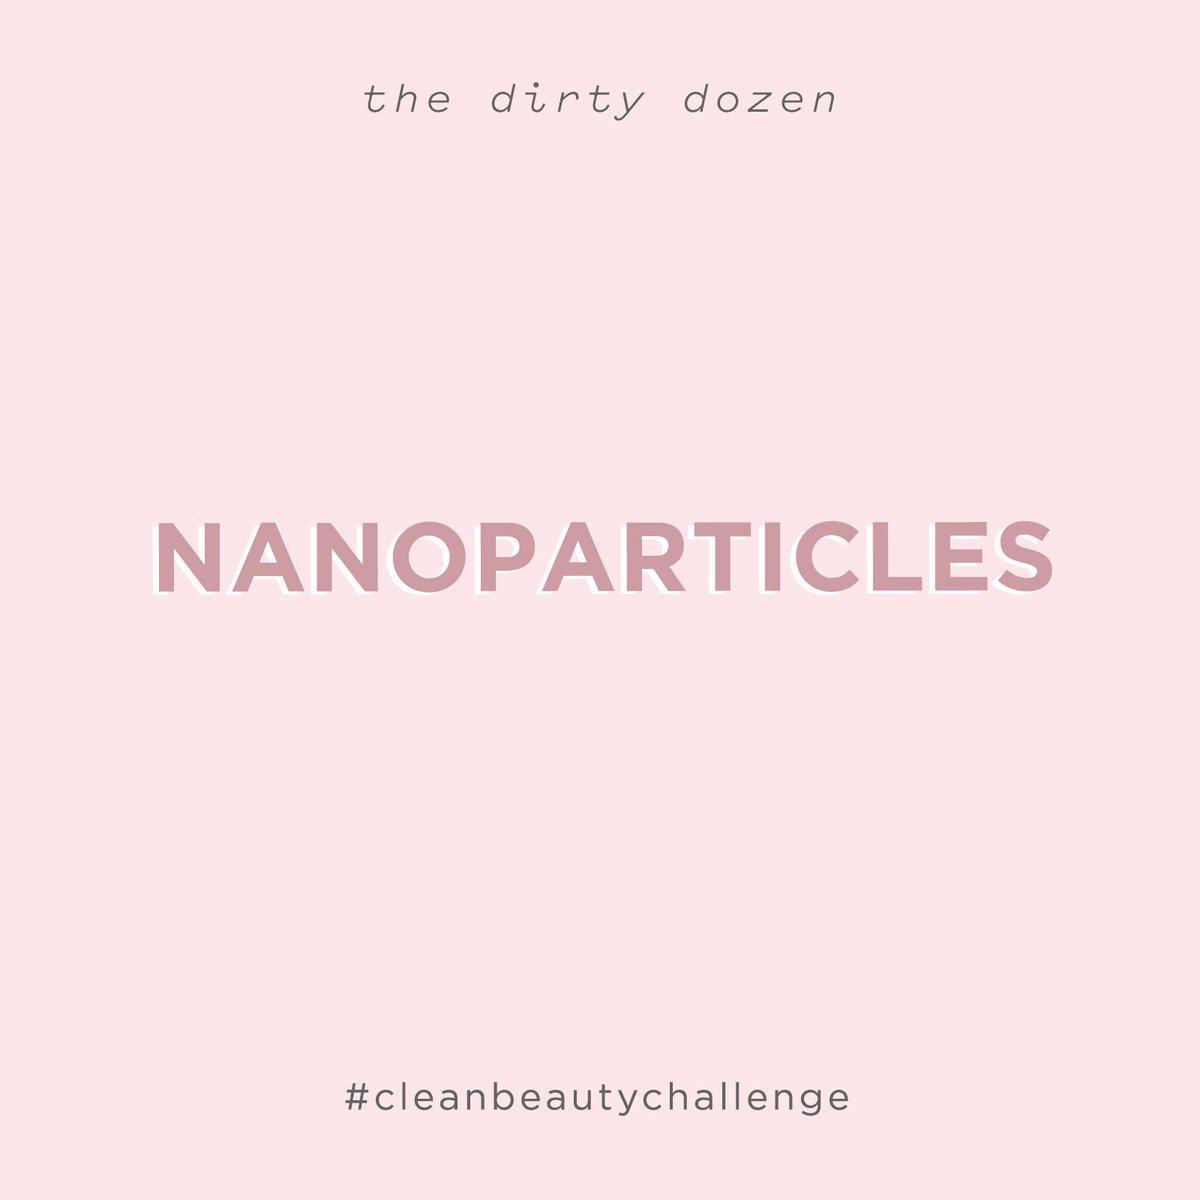 Dirty Dozen #6

WHY it’s dirty: potential organ toxicity, potential DNA/cell damage

WHAT to look for on ingredients list: use of nanoparticles isn’t required to be listed, so look for a label that says “made with non-nano particles”.